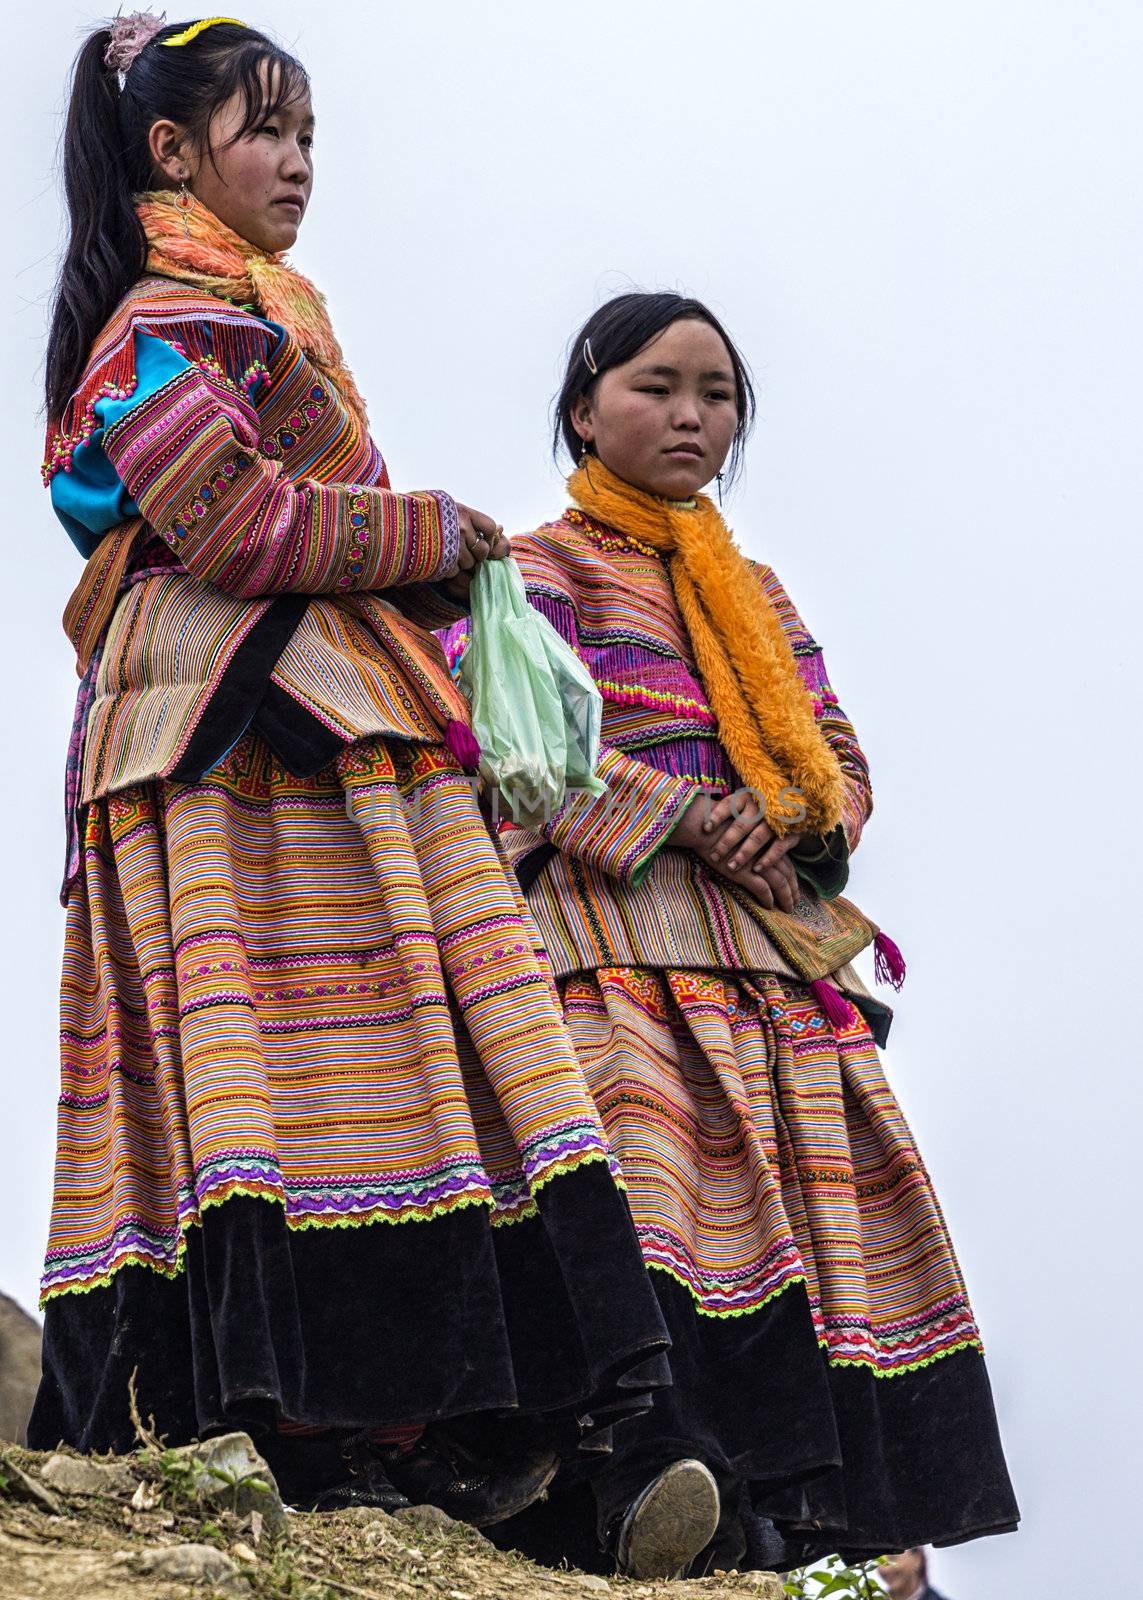 Vietnam Bac Ha - March 2012: Two young Hmong sisters show and wa by Claudine